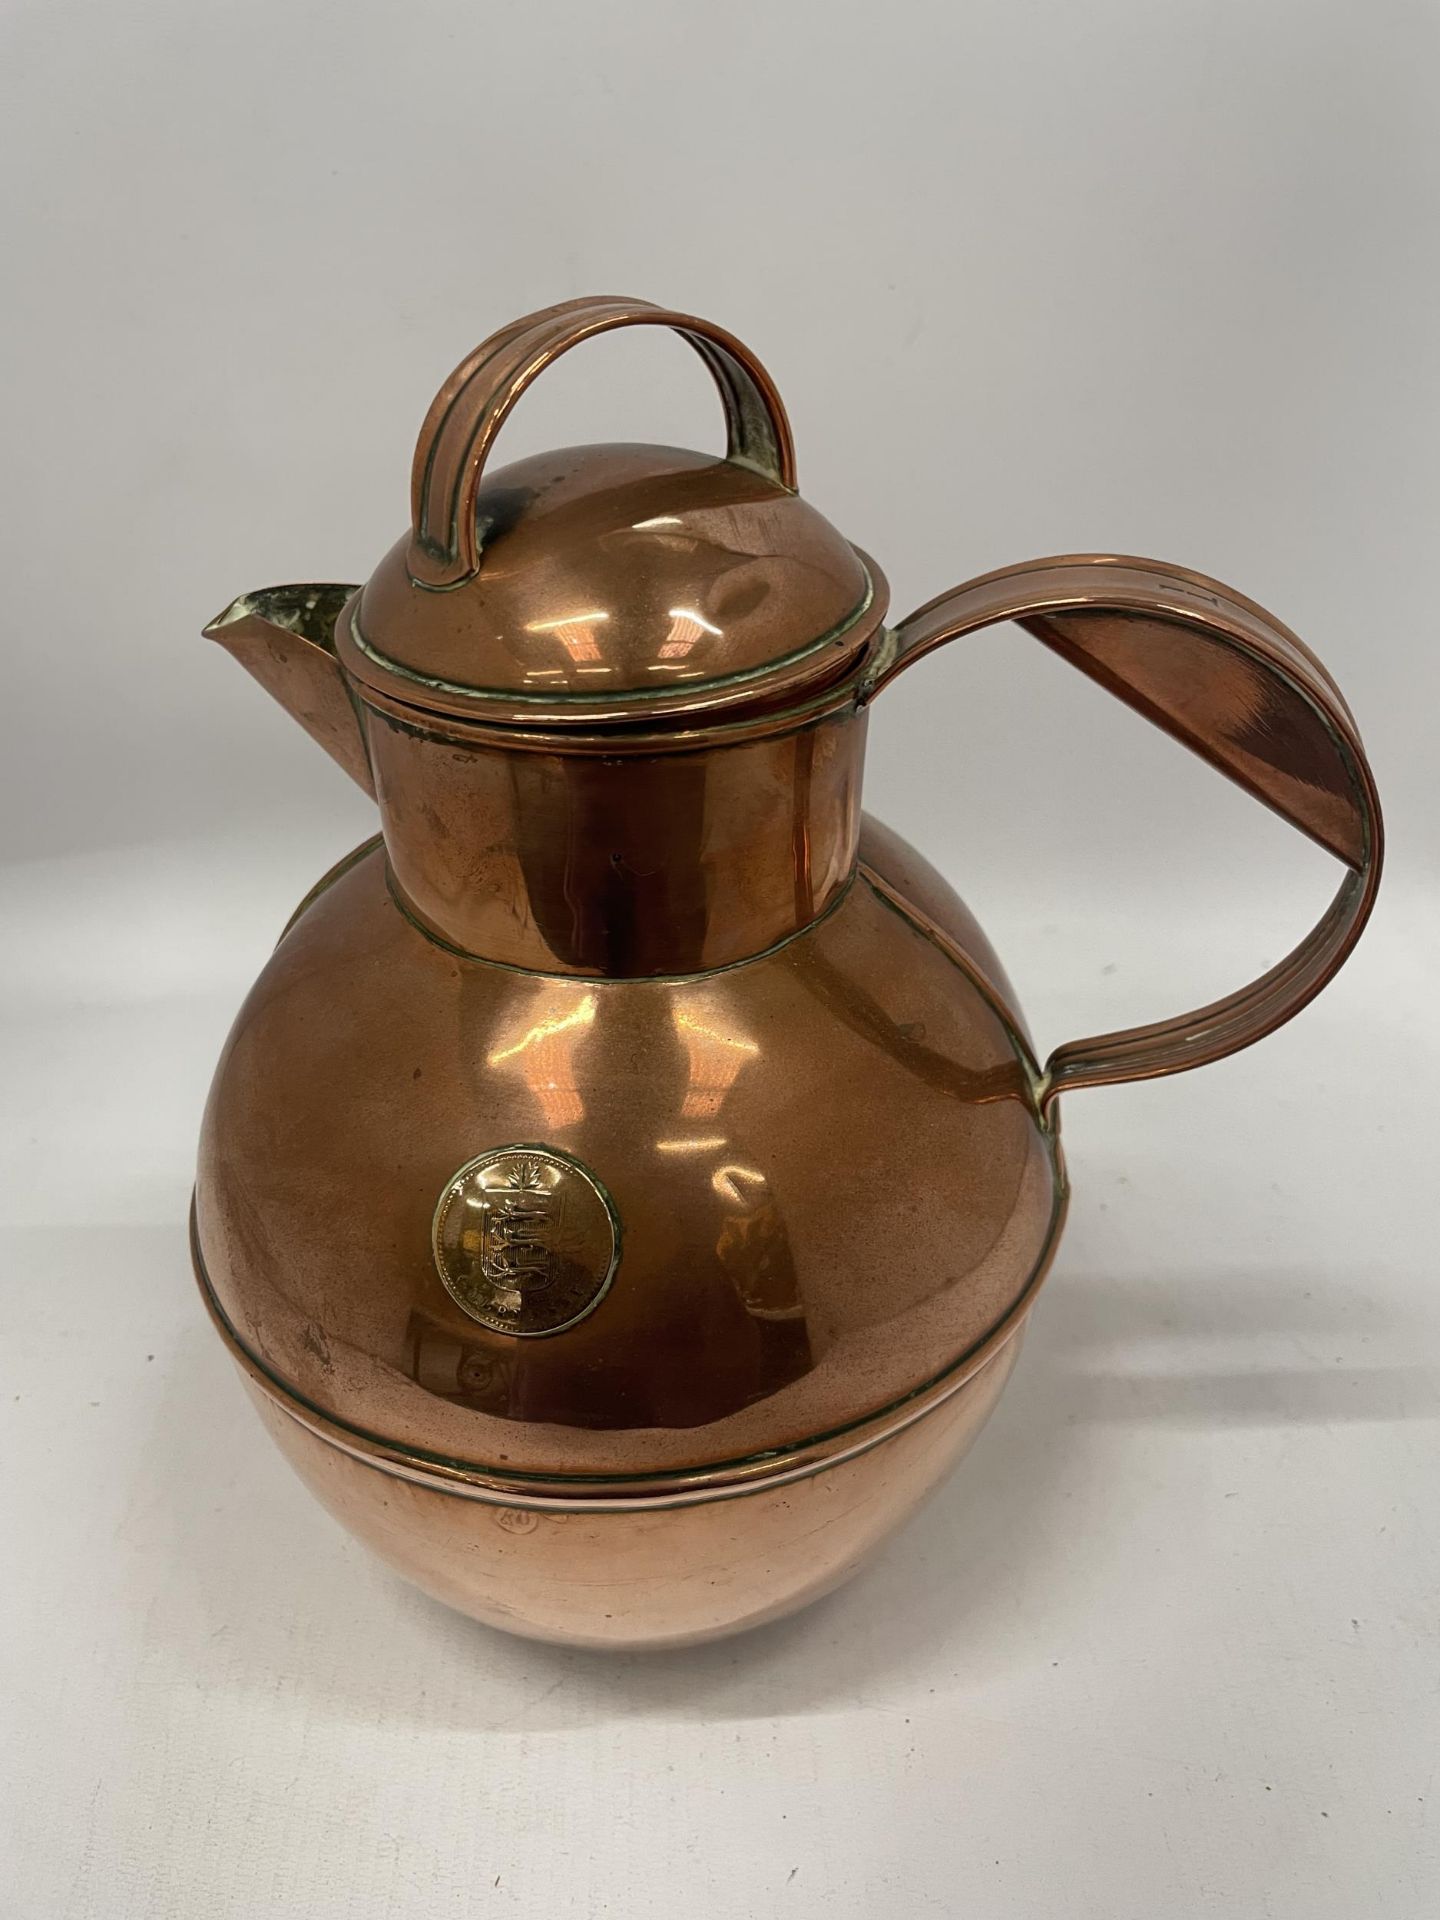 A VINTAGE COPPER KETTLE / WATER JUG WITH INSET GUERNSEY COIN DESIGN